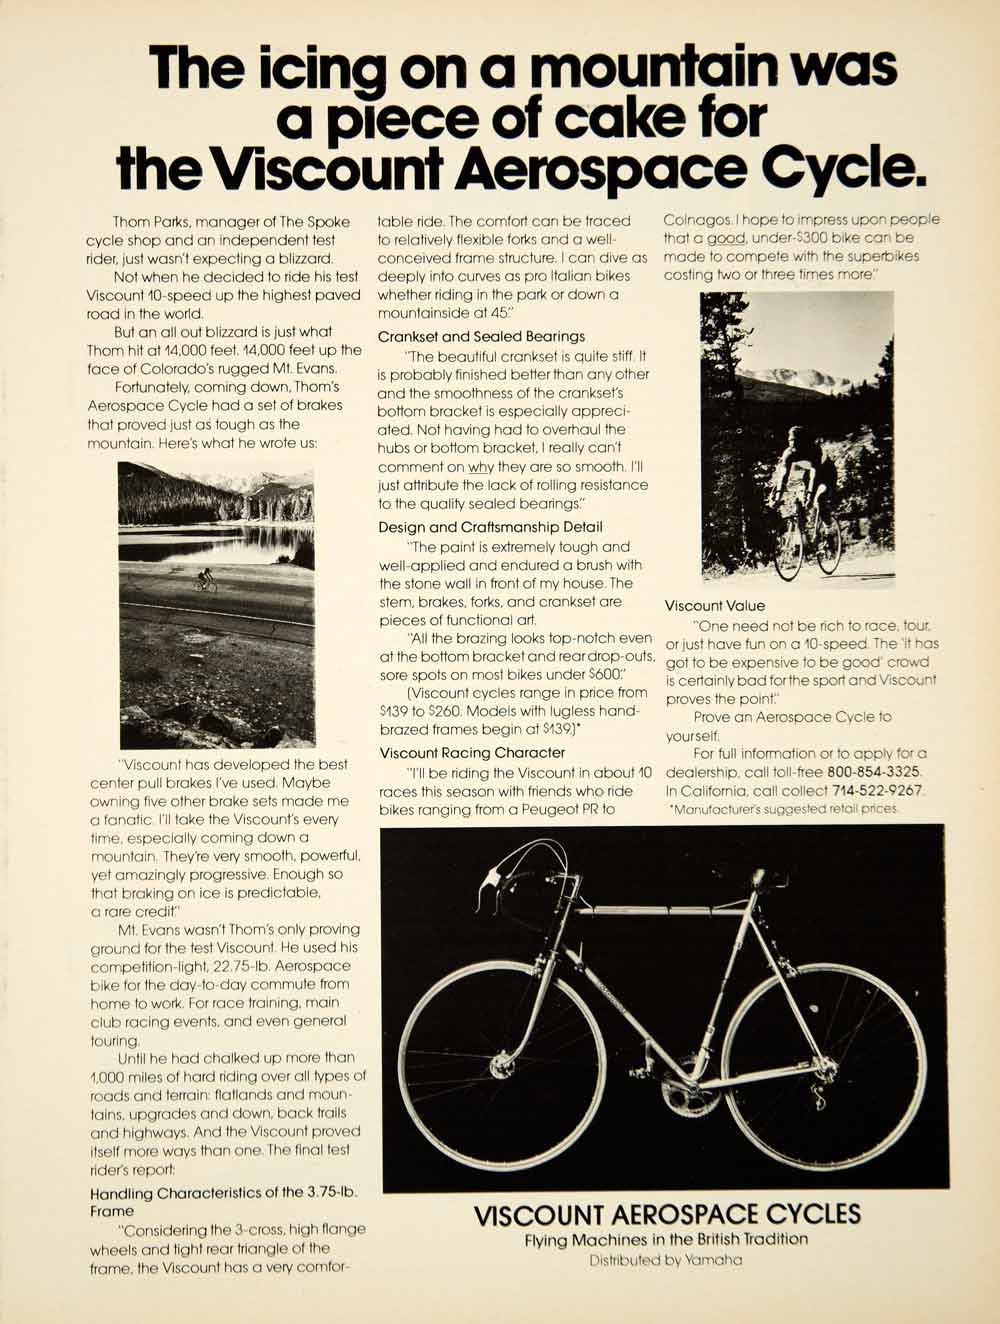 1976 Ad Viscount Aerospace Bicycle Lightweight Thom Parks Spoke Cycle Shop YCD9